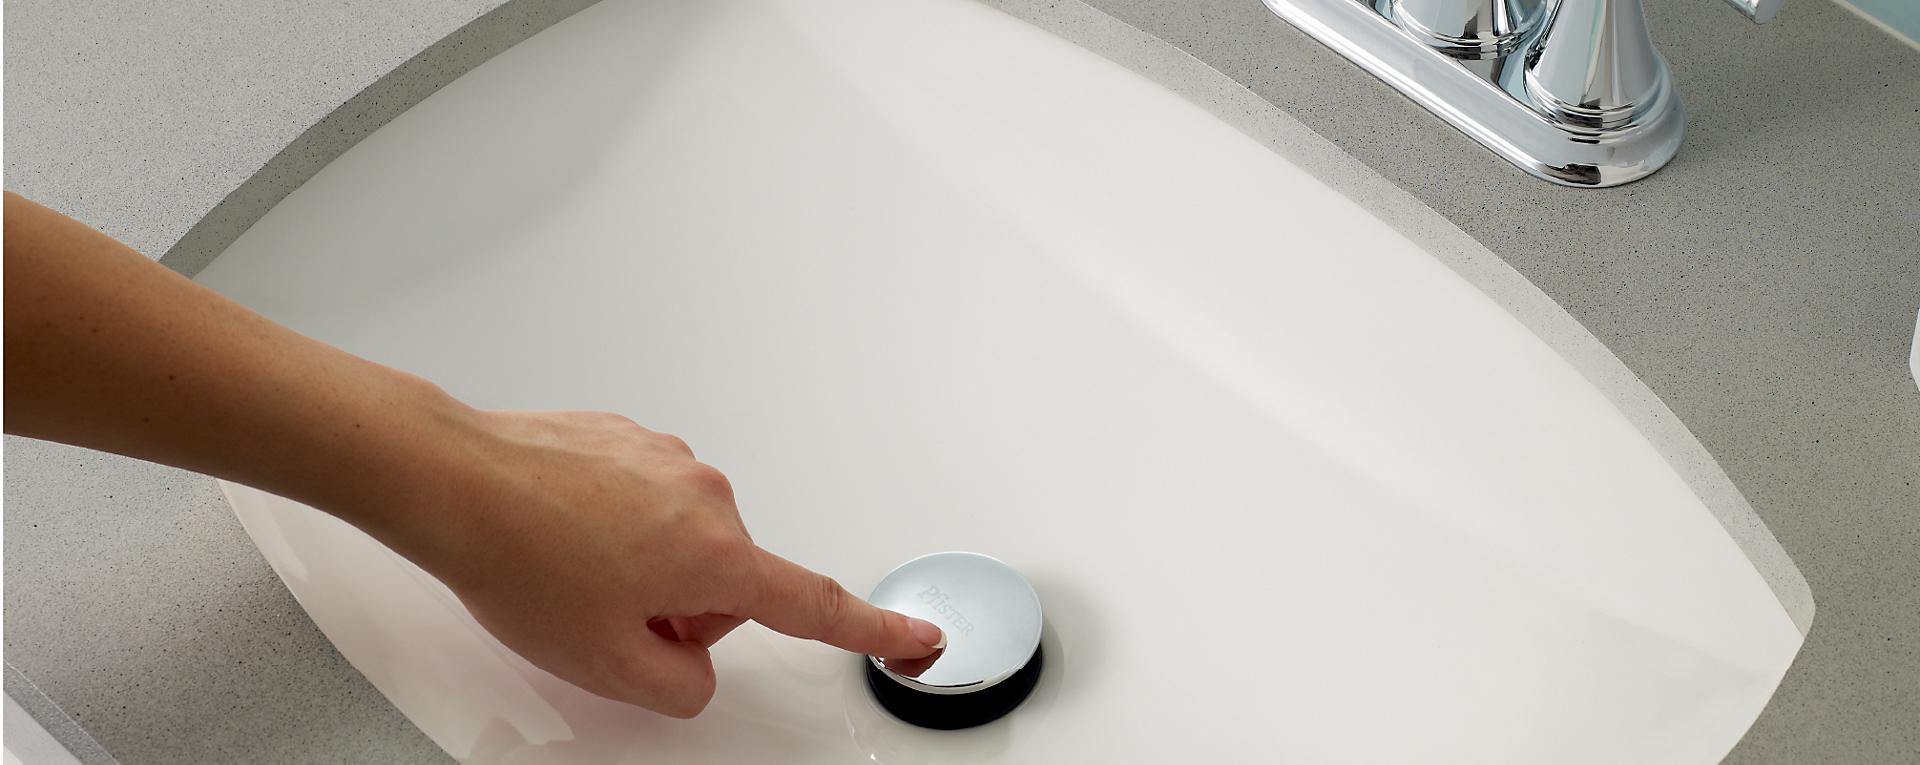 The “easy button” for sink drains.